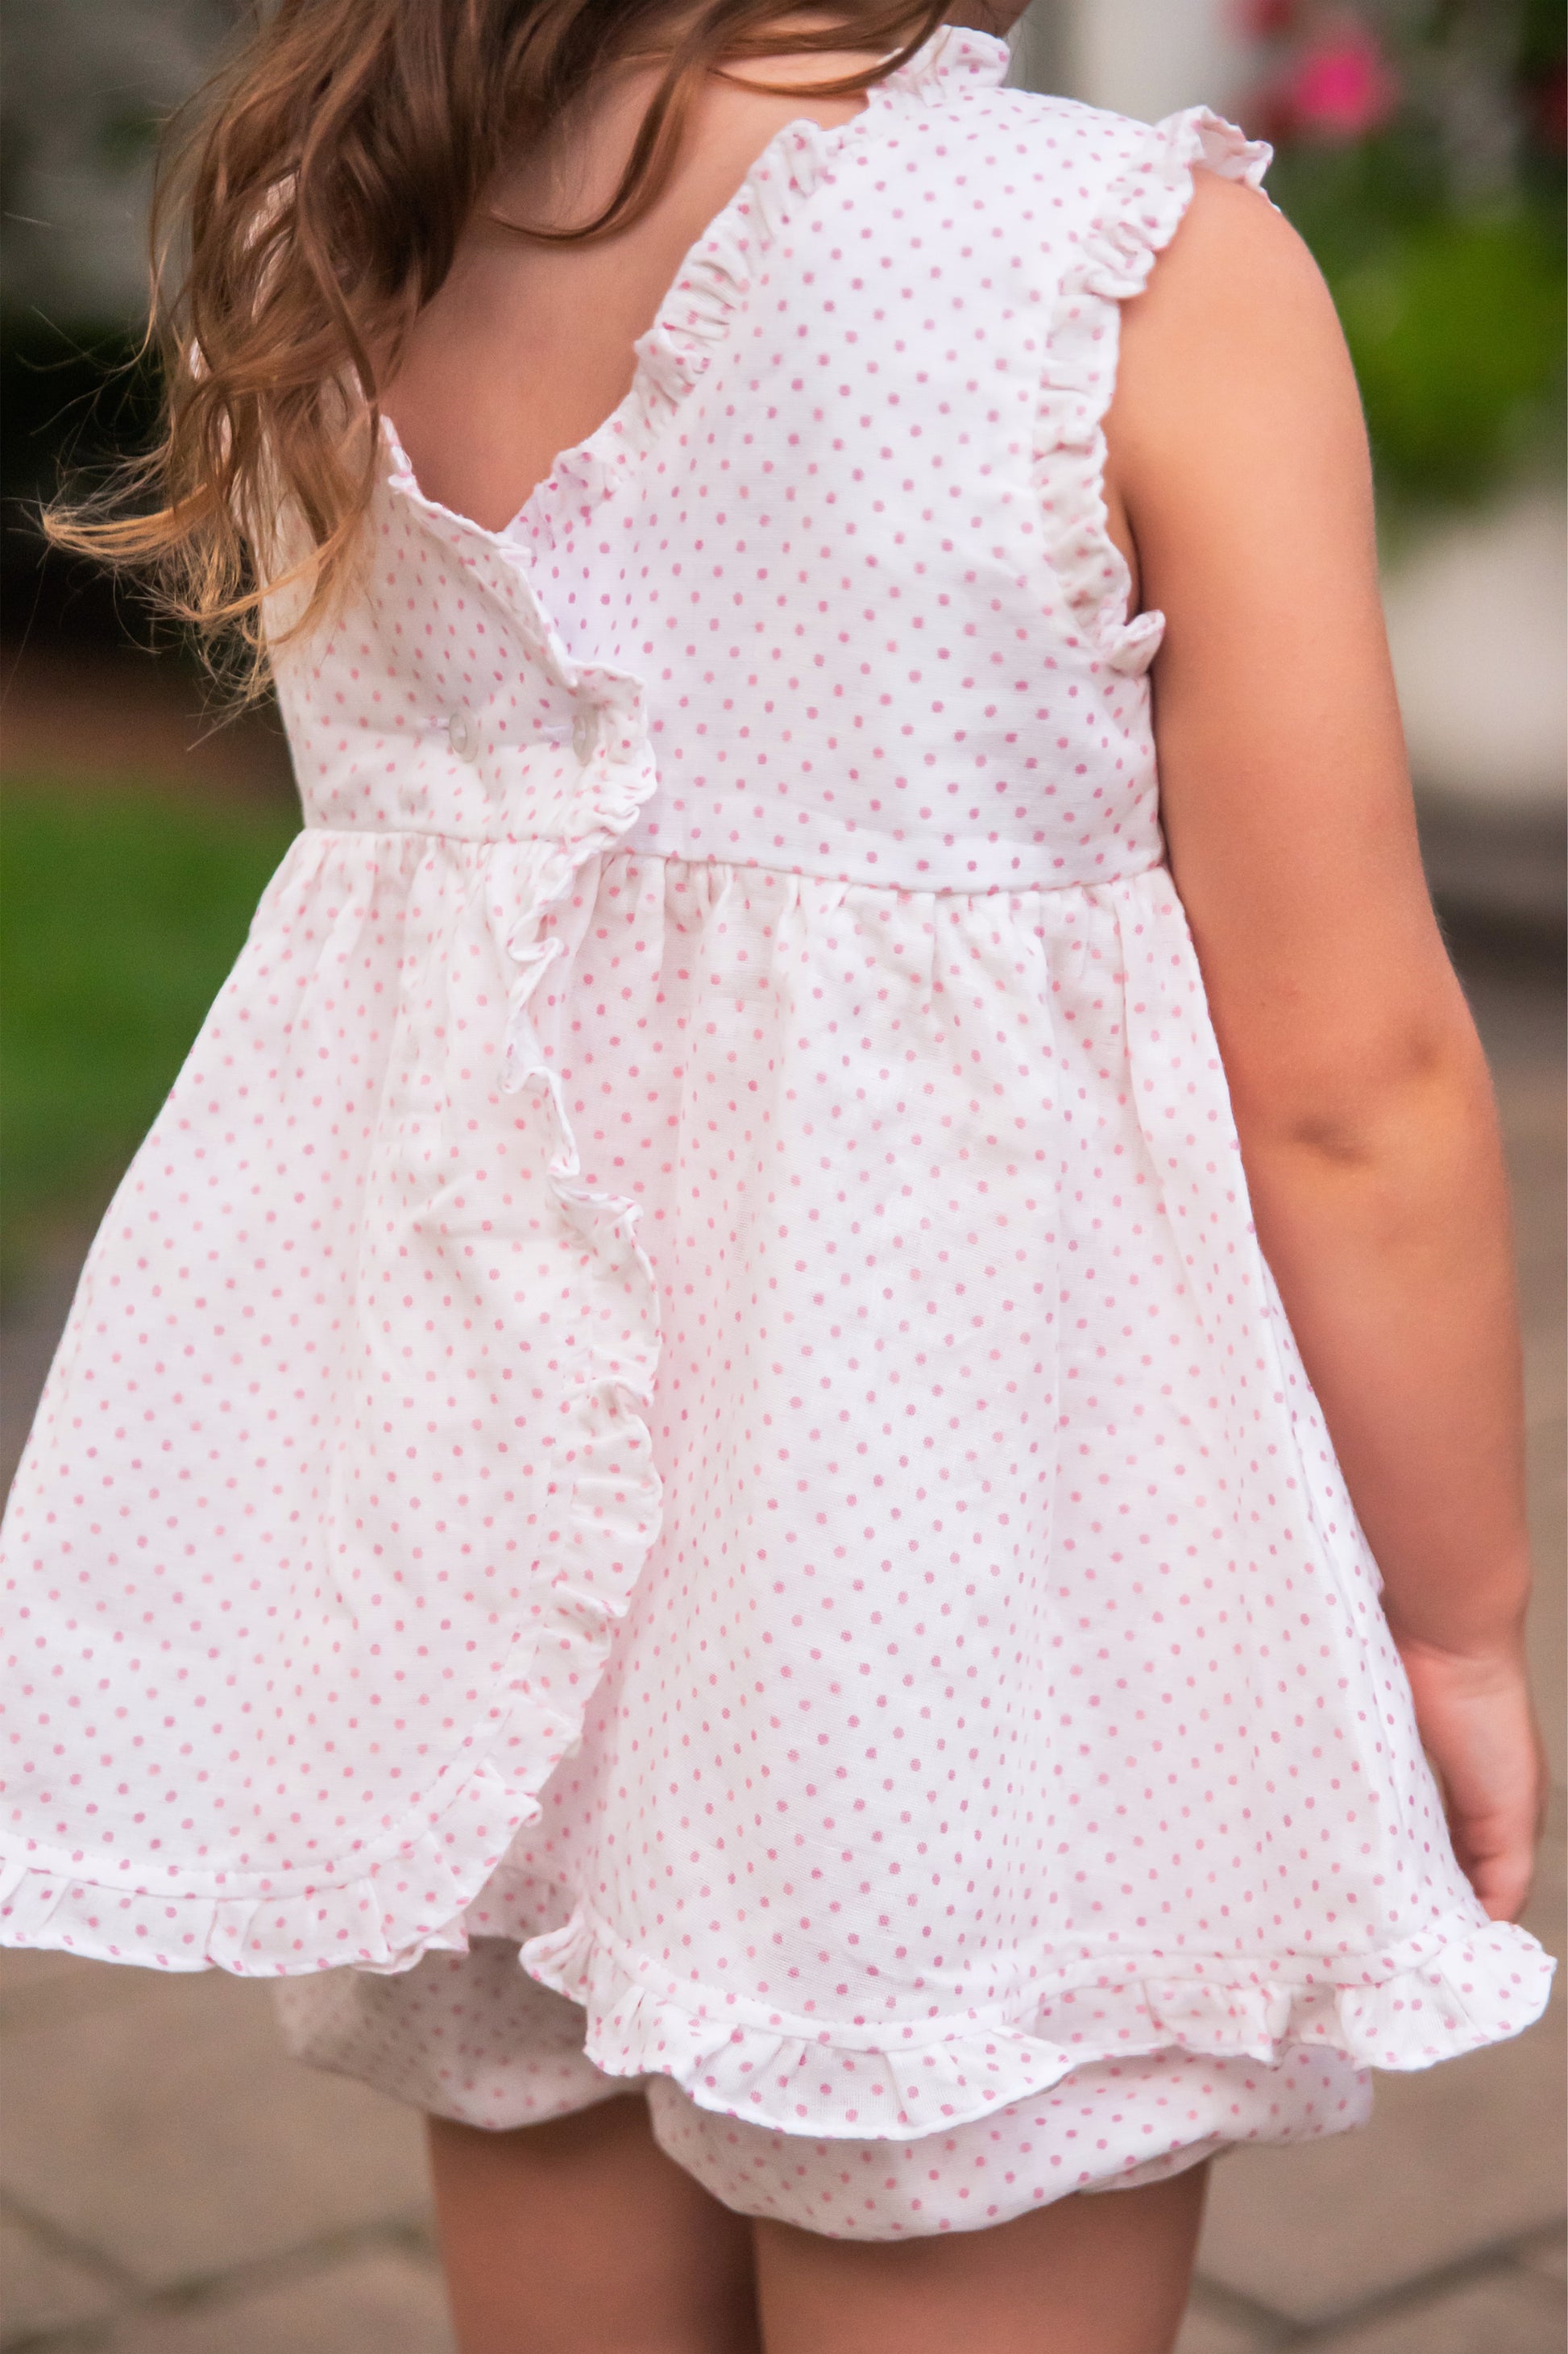 Buy Girls Light Pink Lace Ruffled Bloomers Online at Beautiful